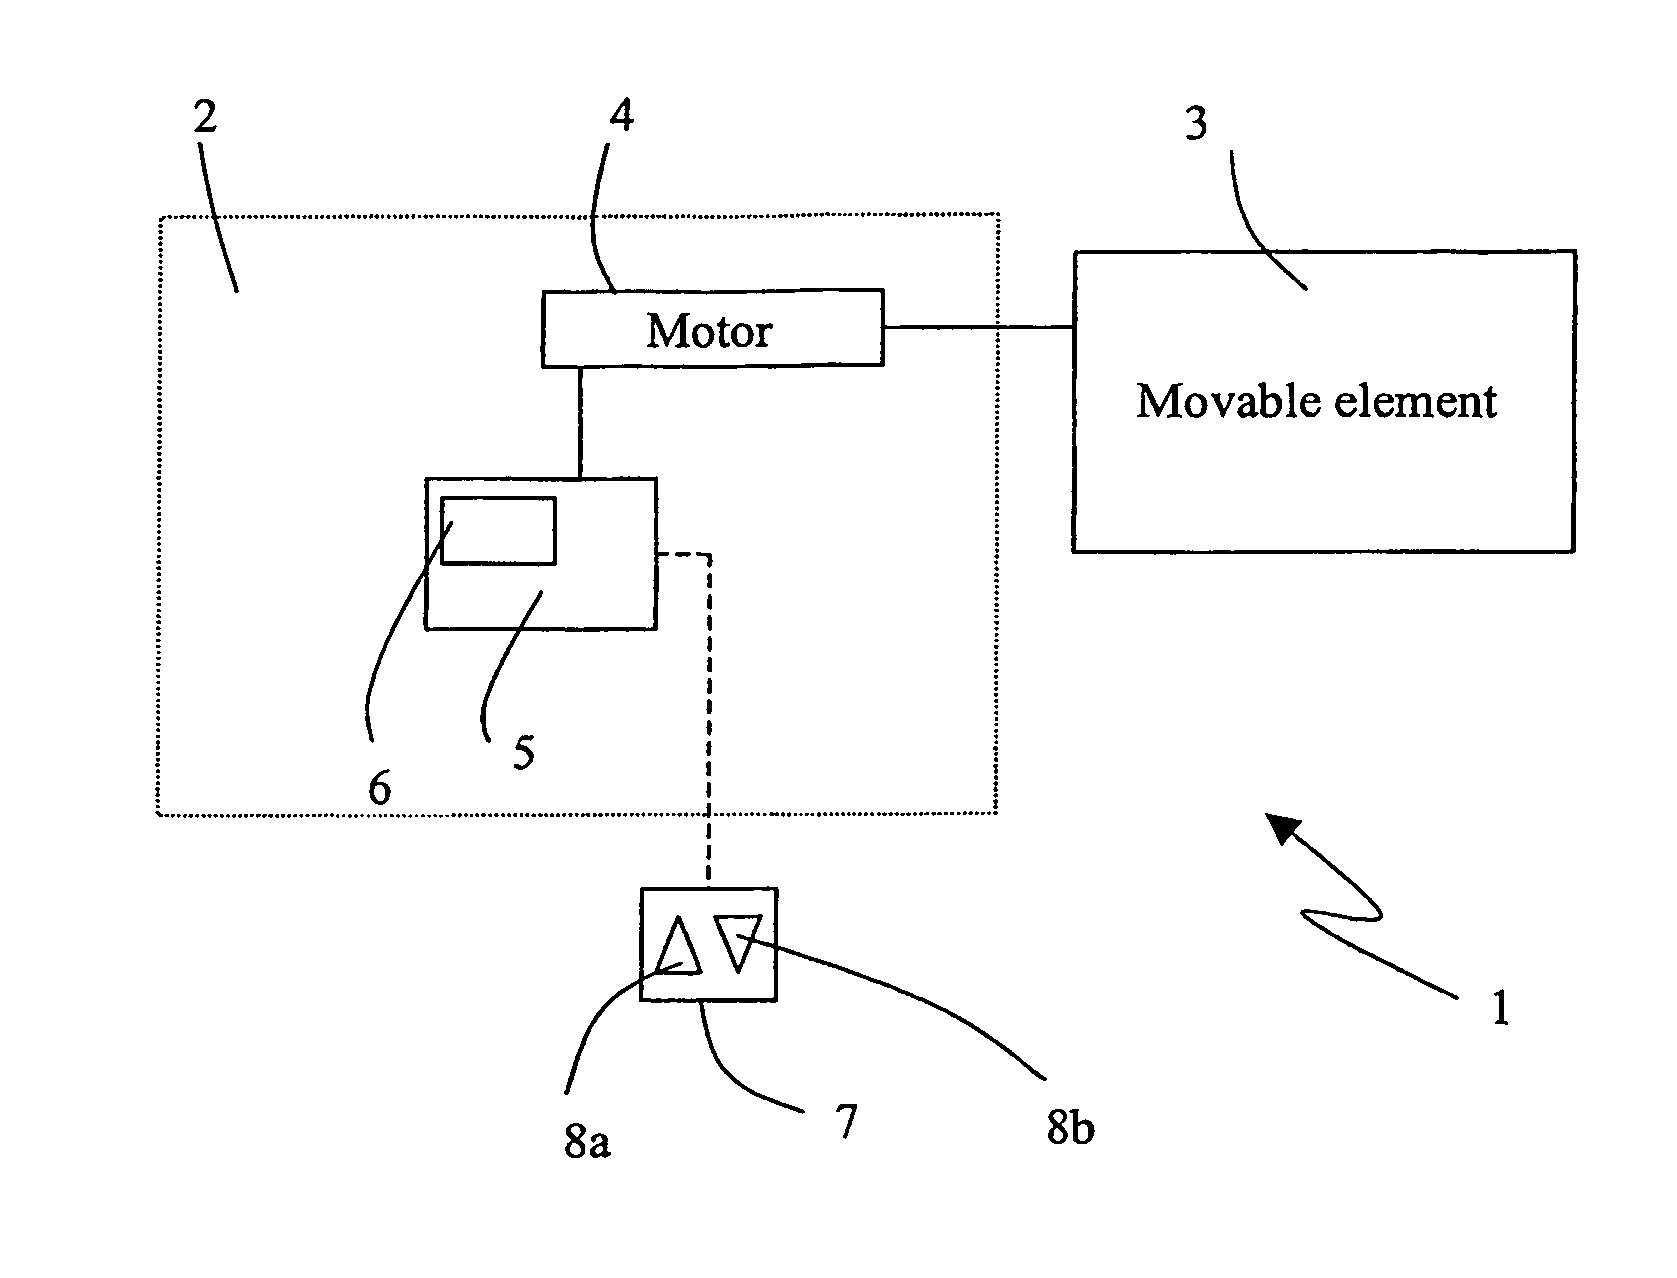 Method of operating a controlled roller blind supplied by way of a wire control interface